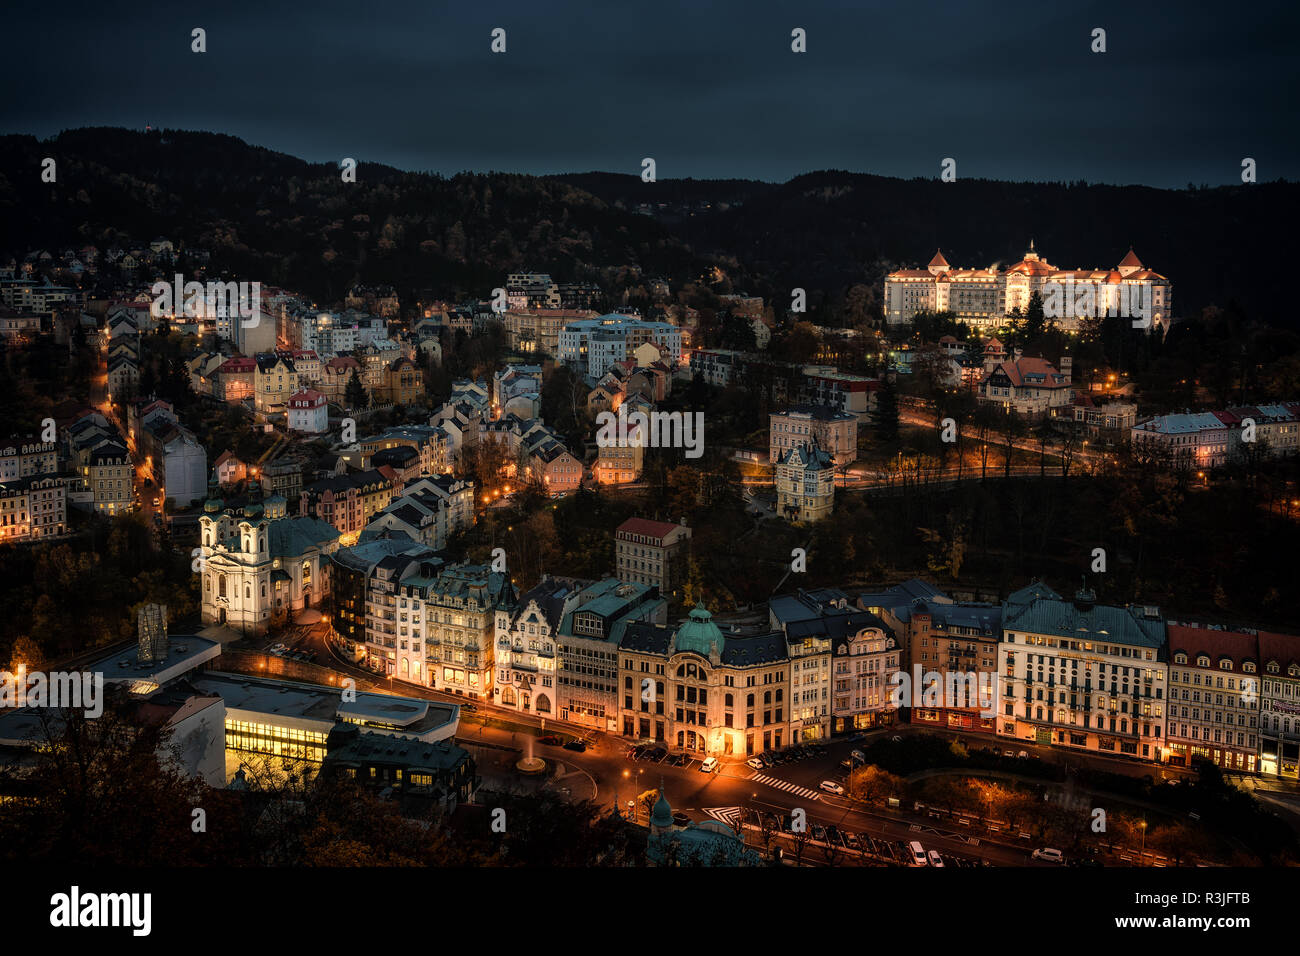 Beautiful view over colorful houses in Karlovy Vary, a spa town in Czech Republic in autumn season Stock Photo